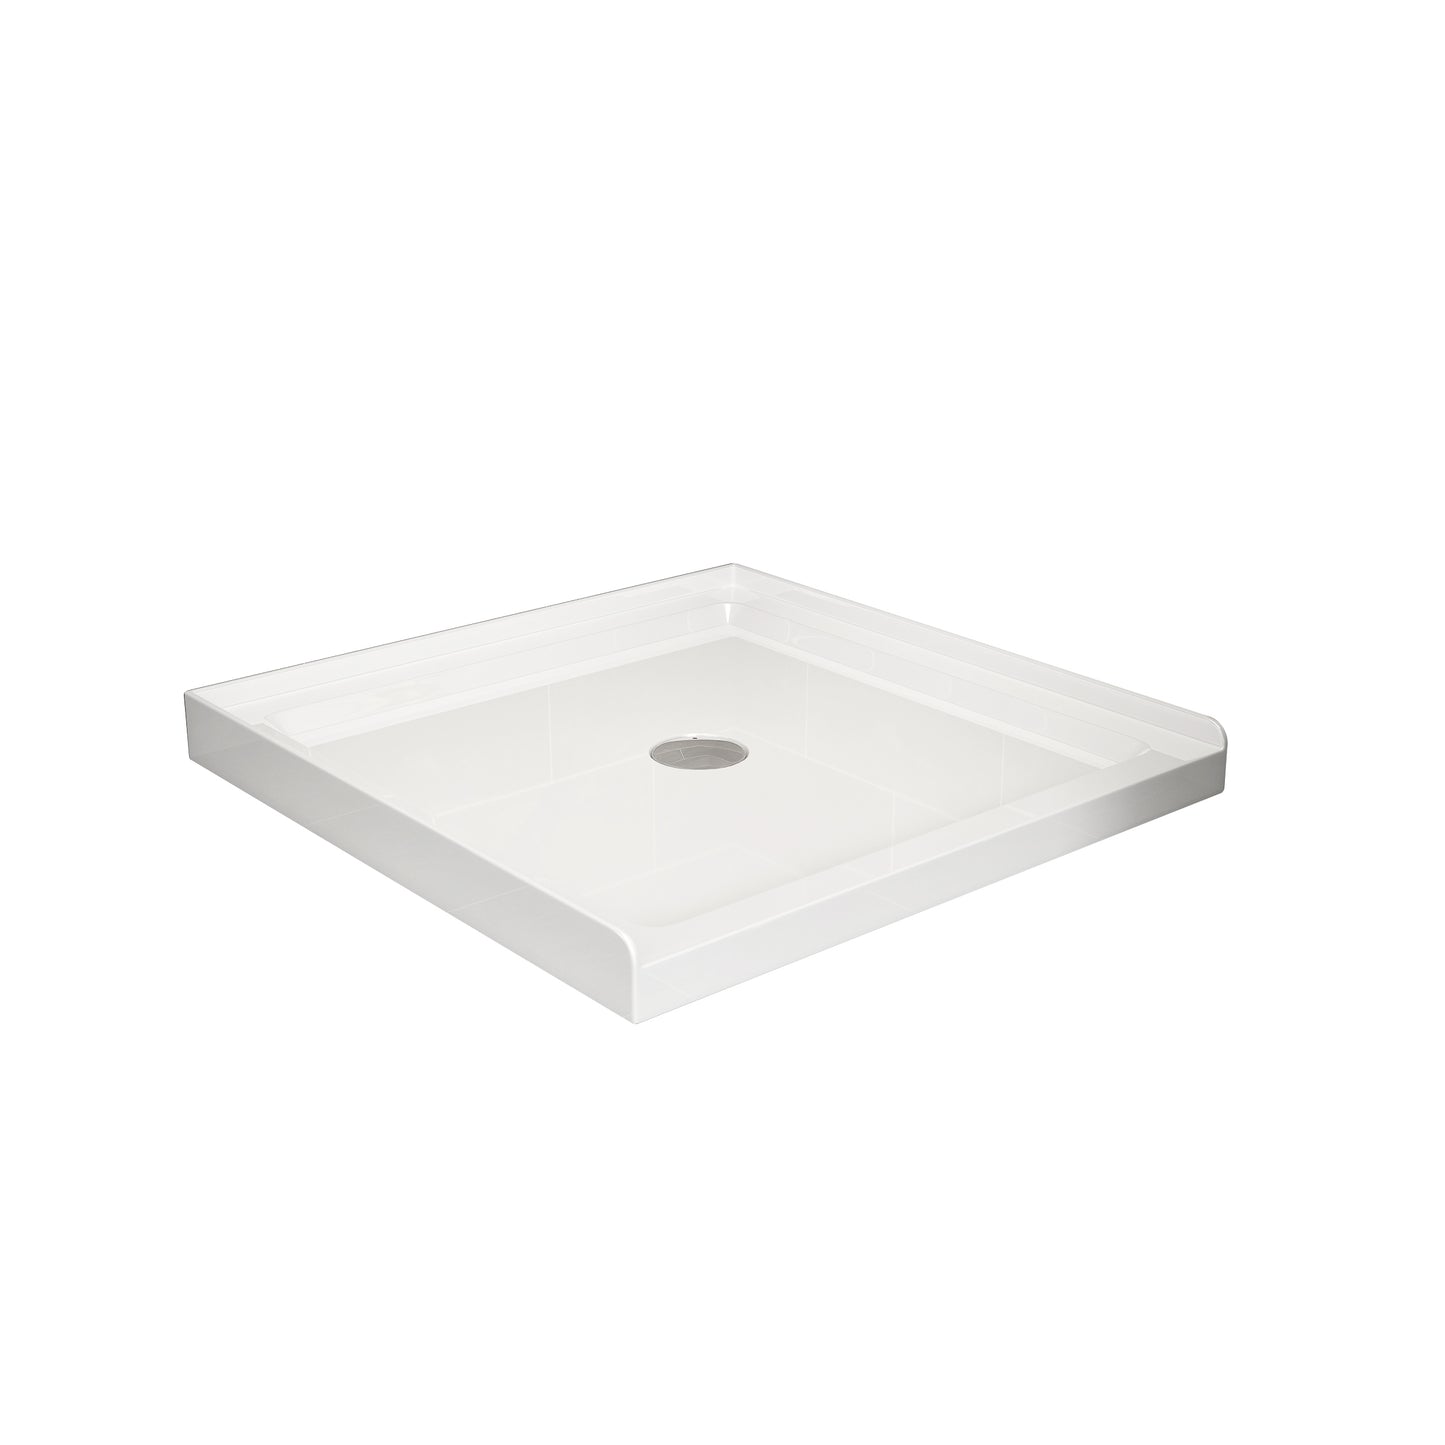 36 x 36 inch Acrylic Shower Base Pan for Tile color:white 